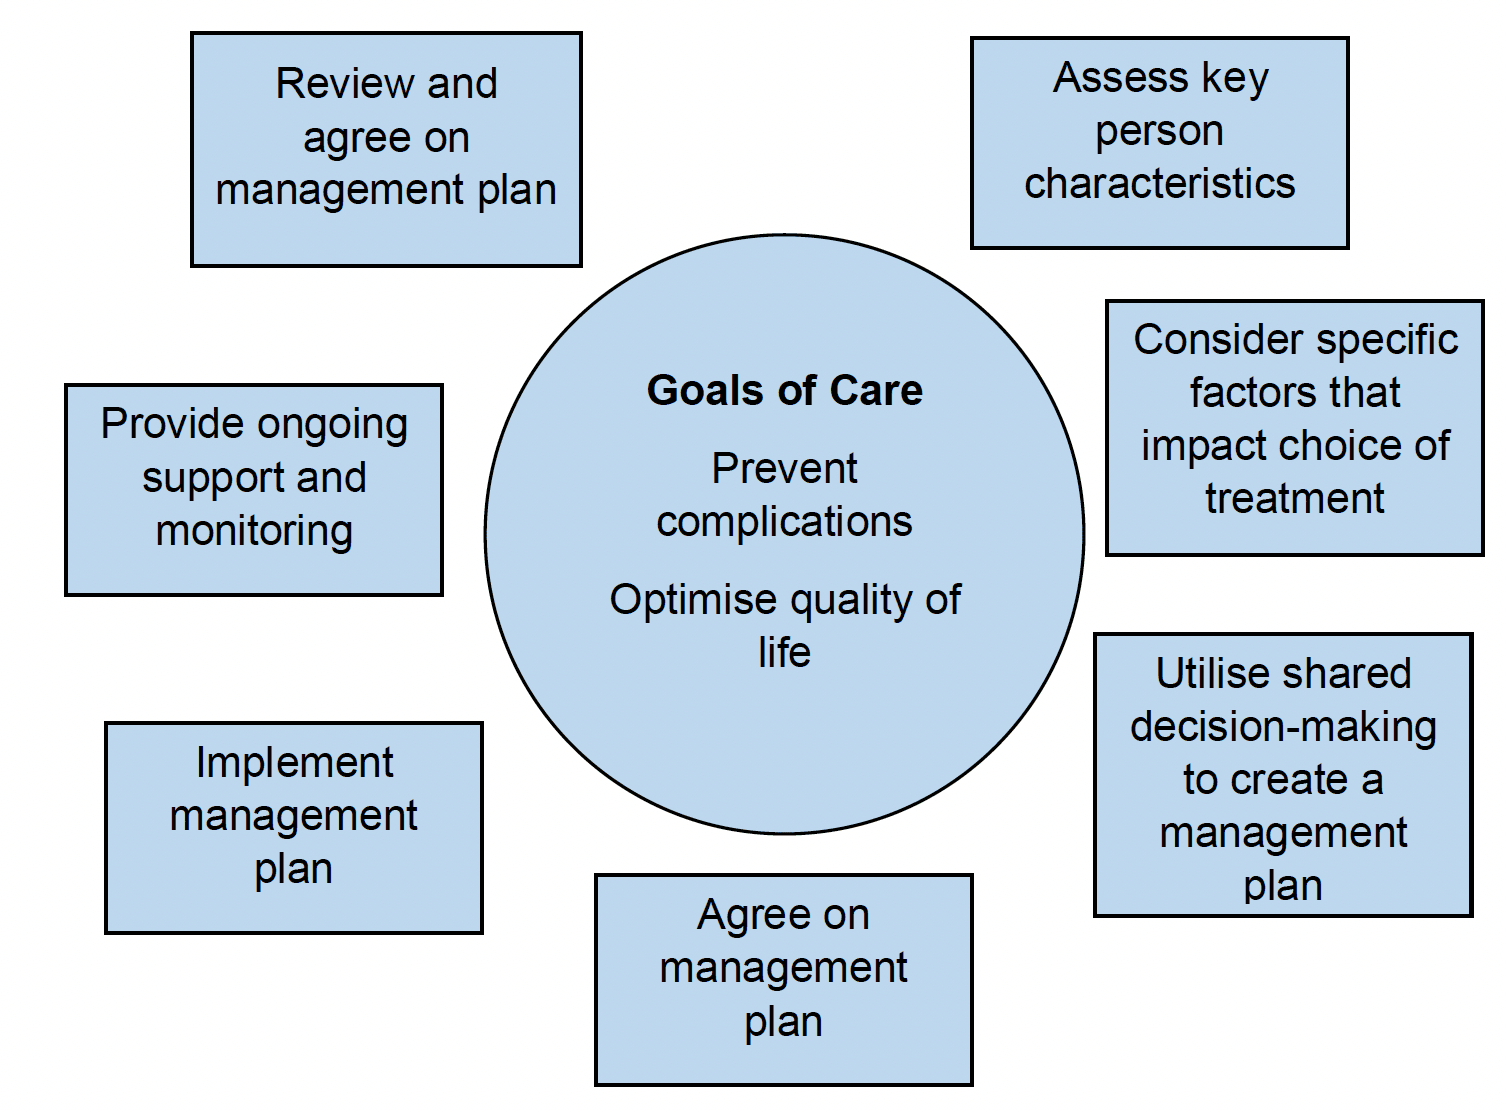 Diagram representing a simplified version of the decision cycle for management of T2DM, centred around goals of care.